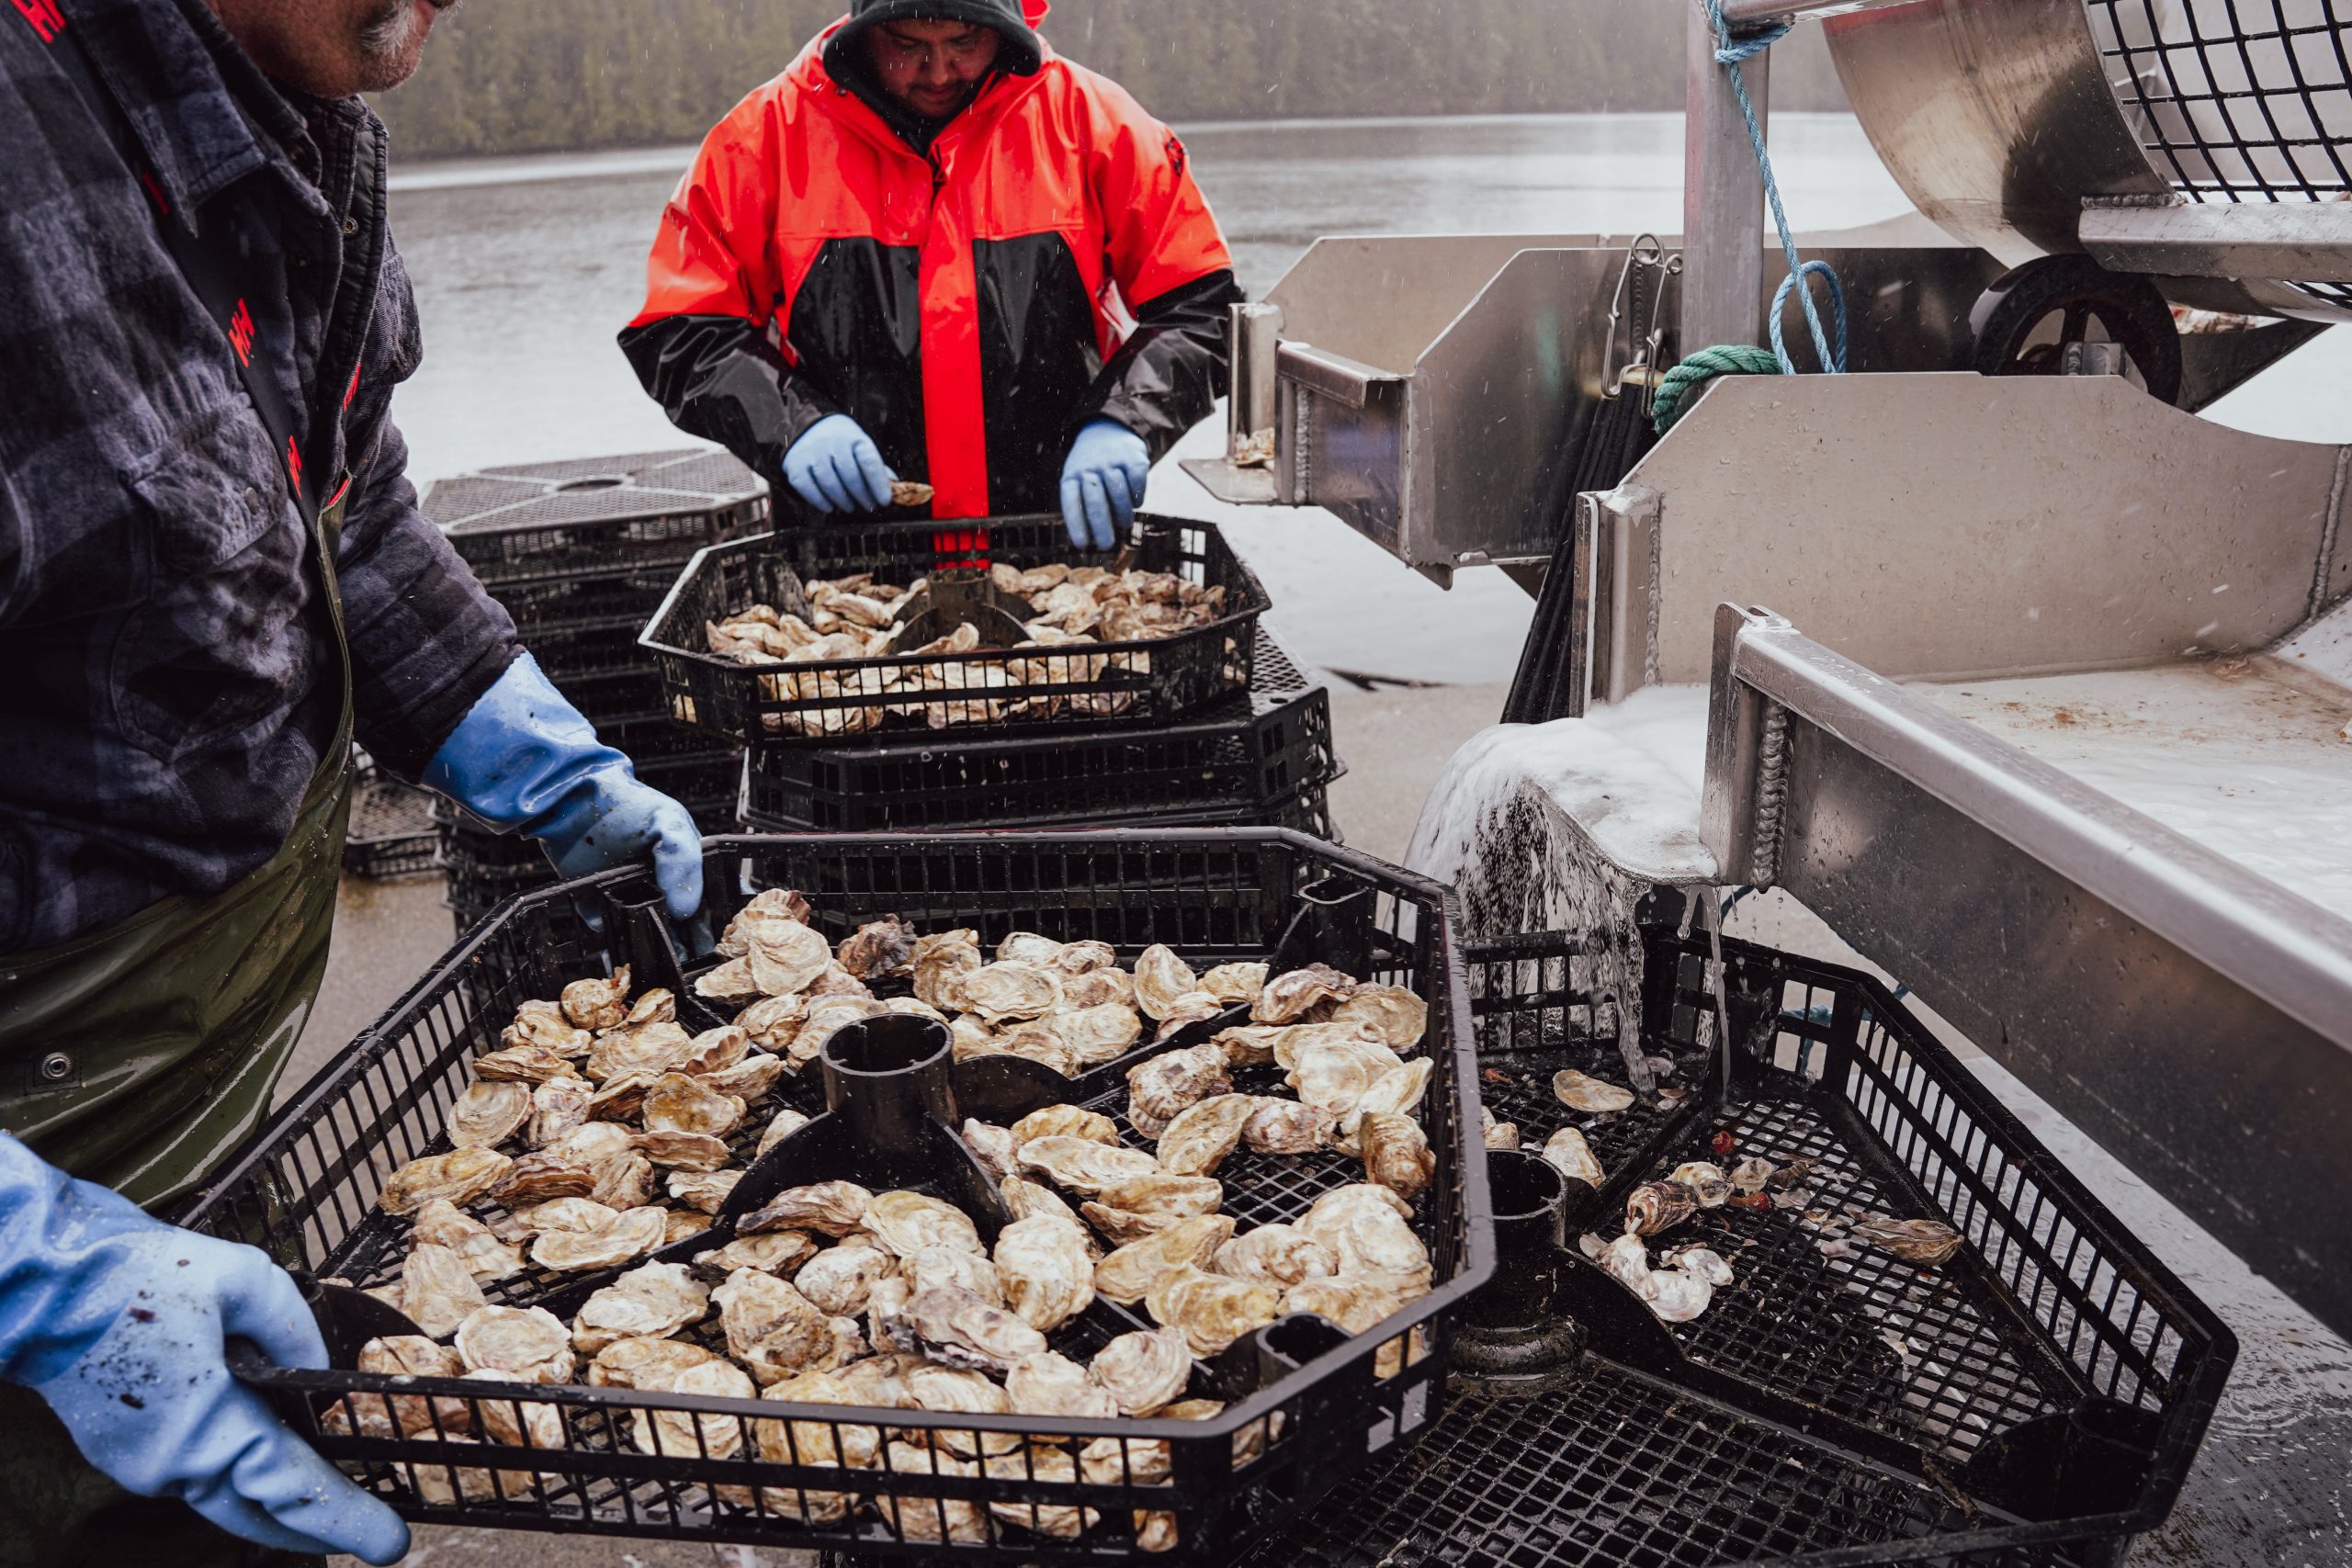 K'awat'si Shellfish Workers handling freshly harvested oysters in black baskets at K'awat'si Shellfish farm in Tribune Bay, located in Gwa'sala-'Nakwaxda'xw Nations Traditional Territory on a cloudy day.